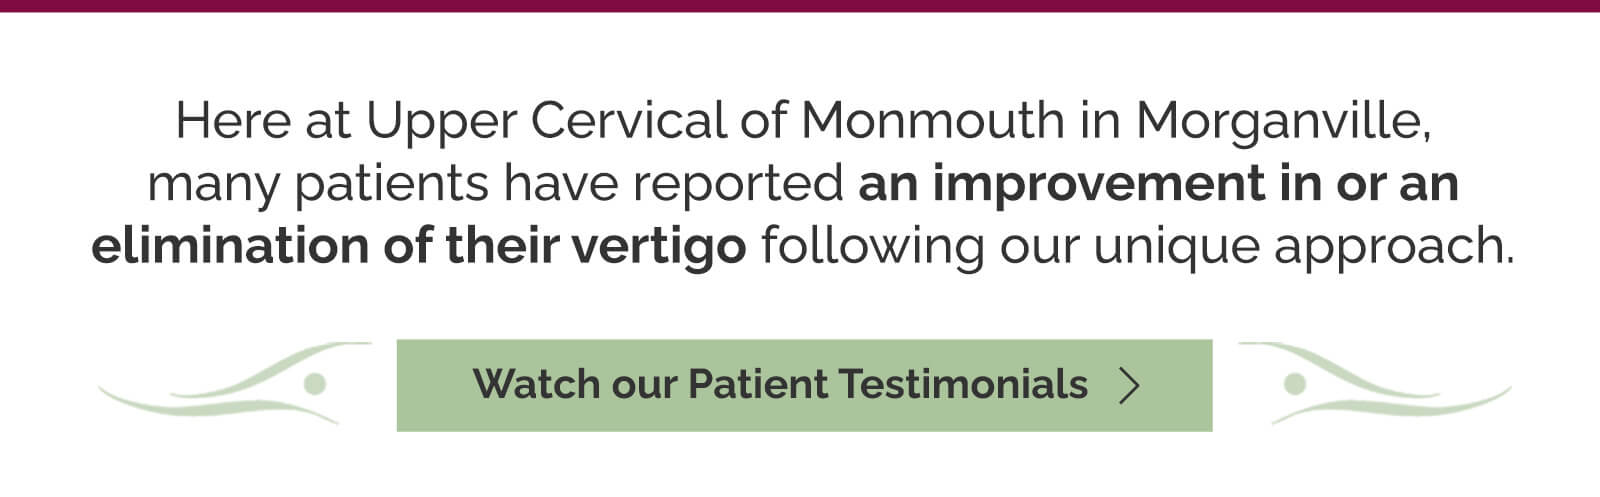 Here at Upper Cervical of Monmouth in Morganville, many patients have reported an improvement in or an elimination of their vertigo following our unique approach. Watch our patient testimonials.